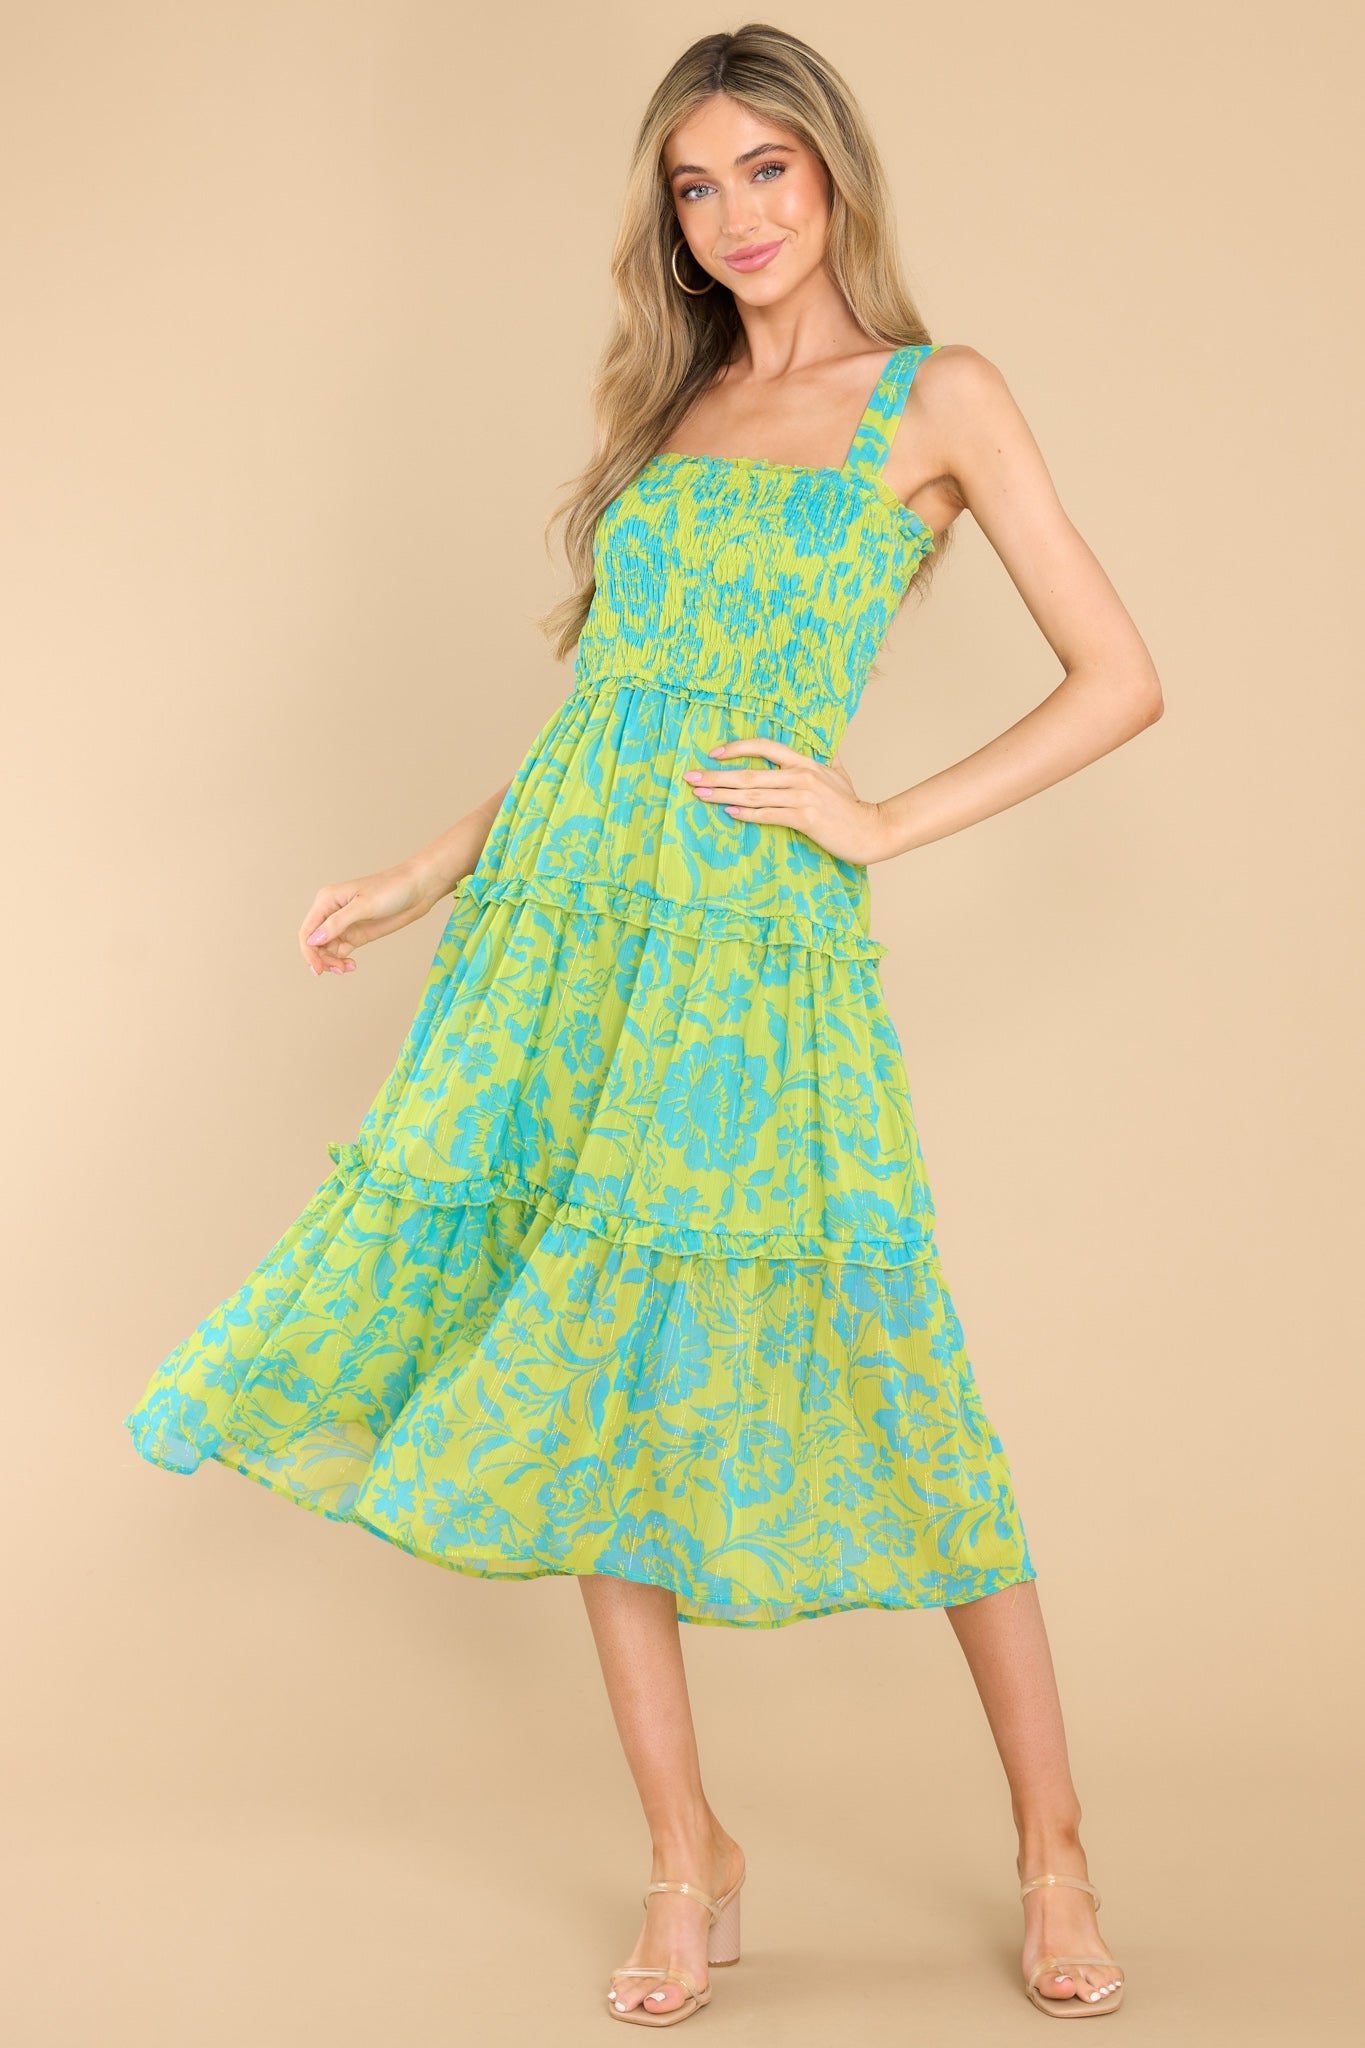 This green and blue dress features a square neckline with small ruffle detailing, tank straps with small elastics along the back that allow for some stretch, a fully smocked bust, and a flowy, tiered skirt.